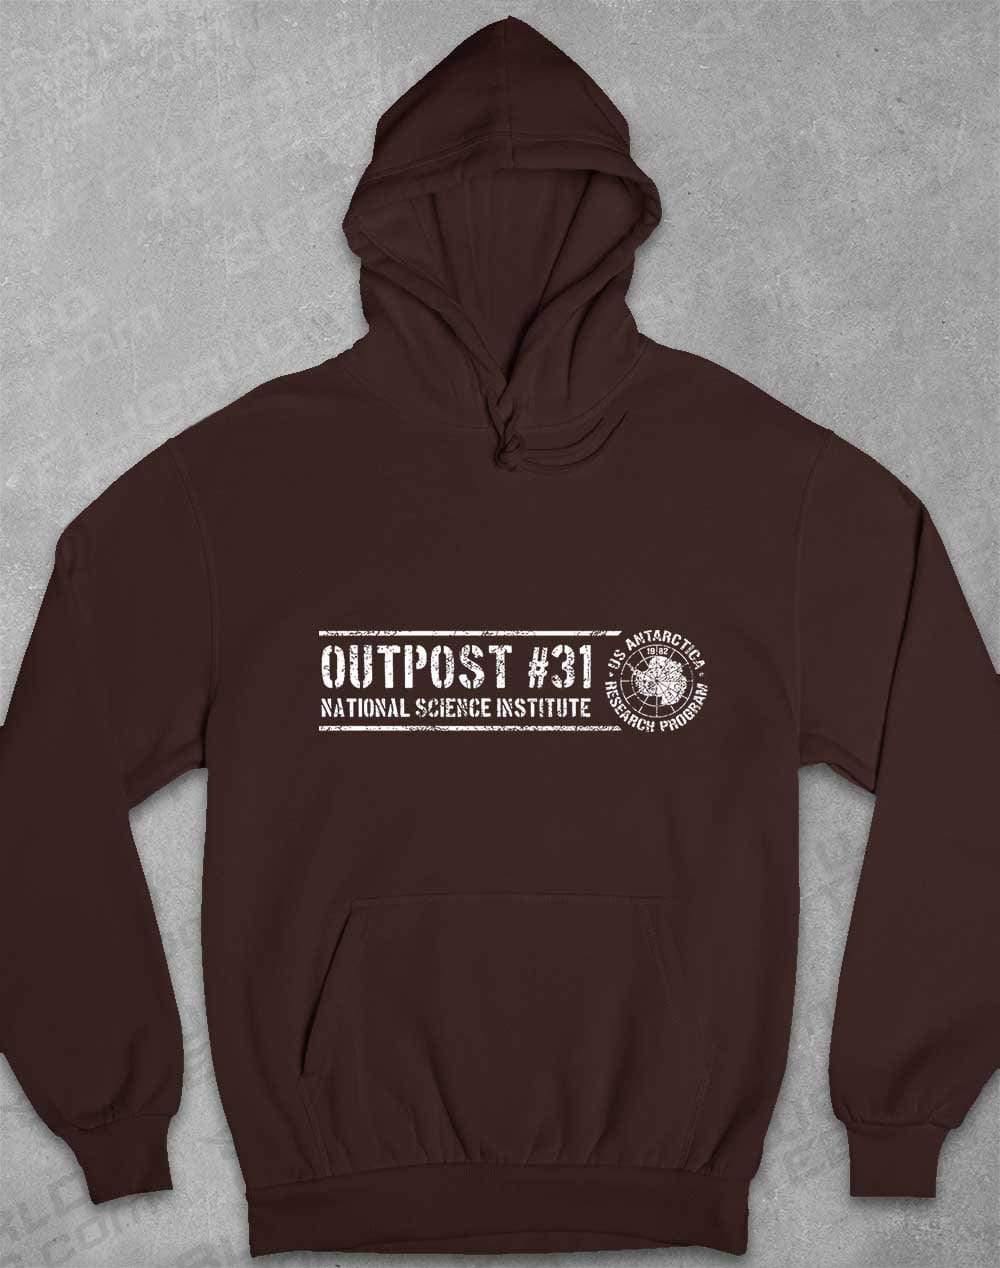 Outpost 31 Antarctica Hoodie XS / Hot Chocolate  - Off World Tees